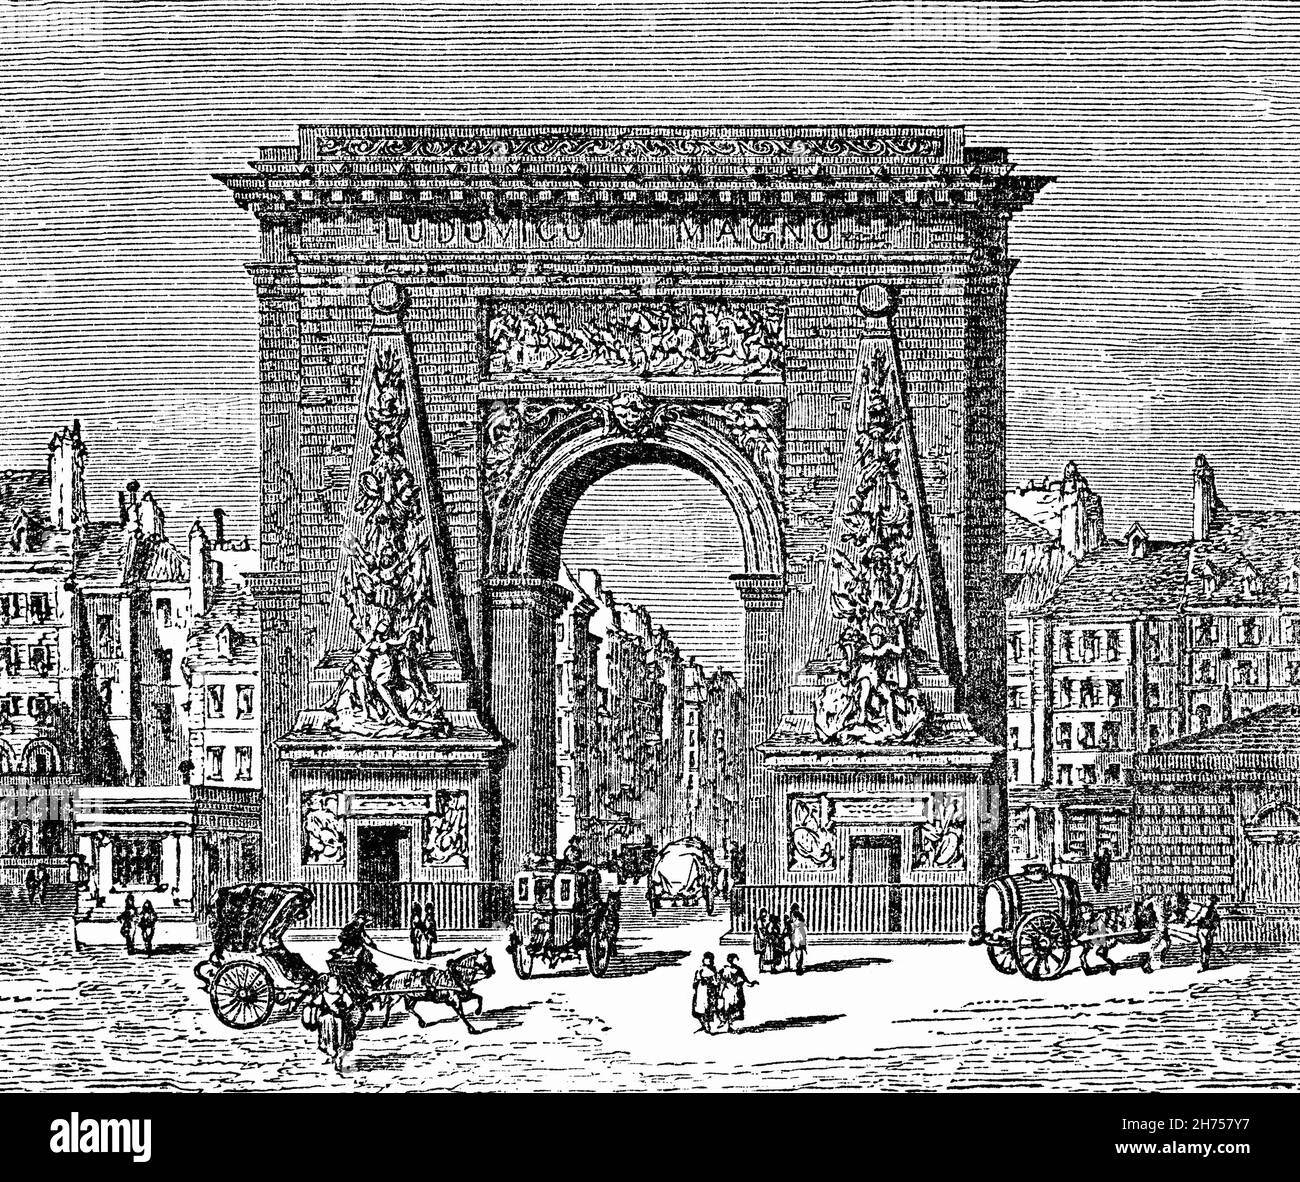 A late 19th Century illustration of the Porte Saint-Denis, a Parisian monument located in the 10th arrondissement. It was originally a gateway through the Wall of Charles V that was built between 1356 and 1383 to protect the Right Bank of Paris. Stock Photo